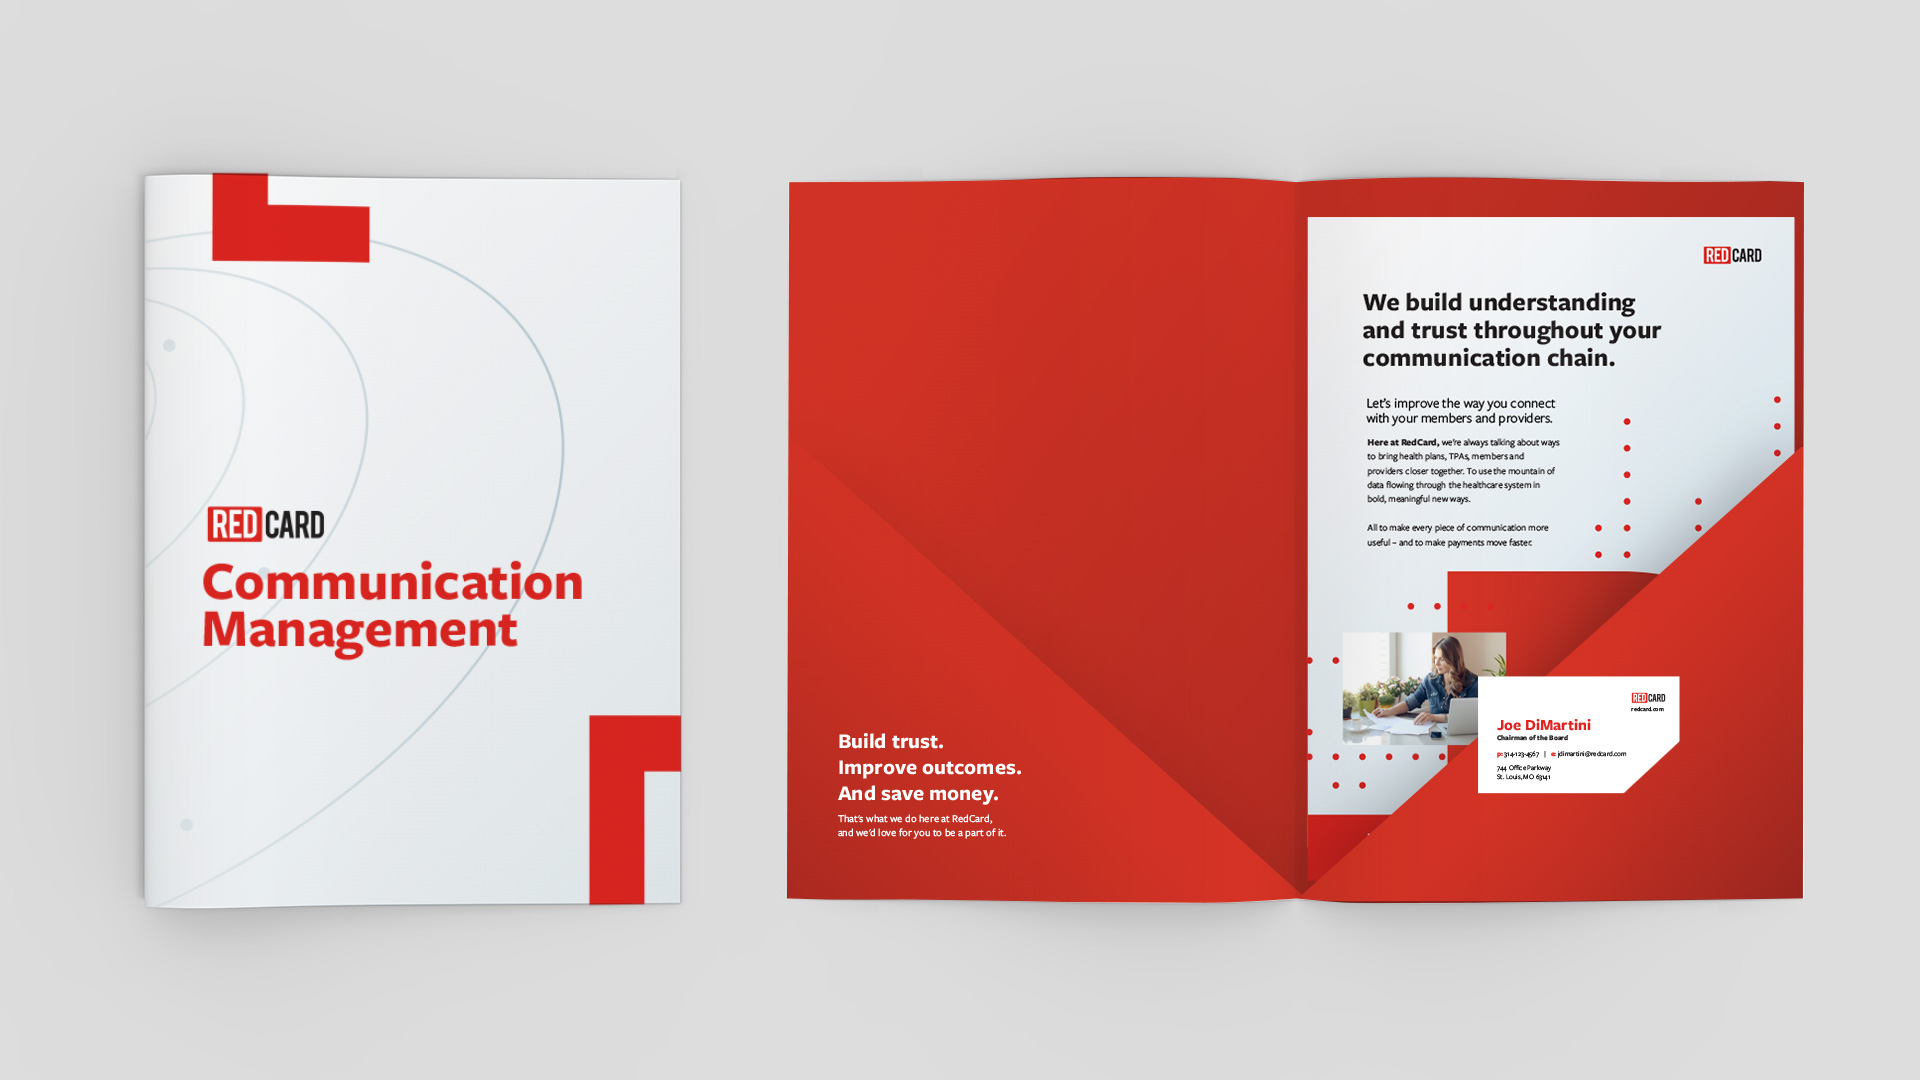 Custom folder design made by Atomicdust for the client RedCard, a health care marketing company